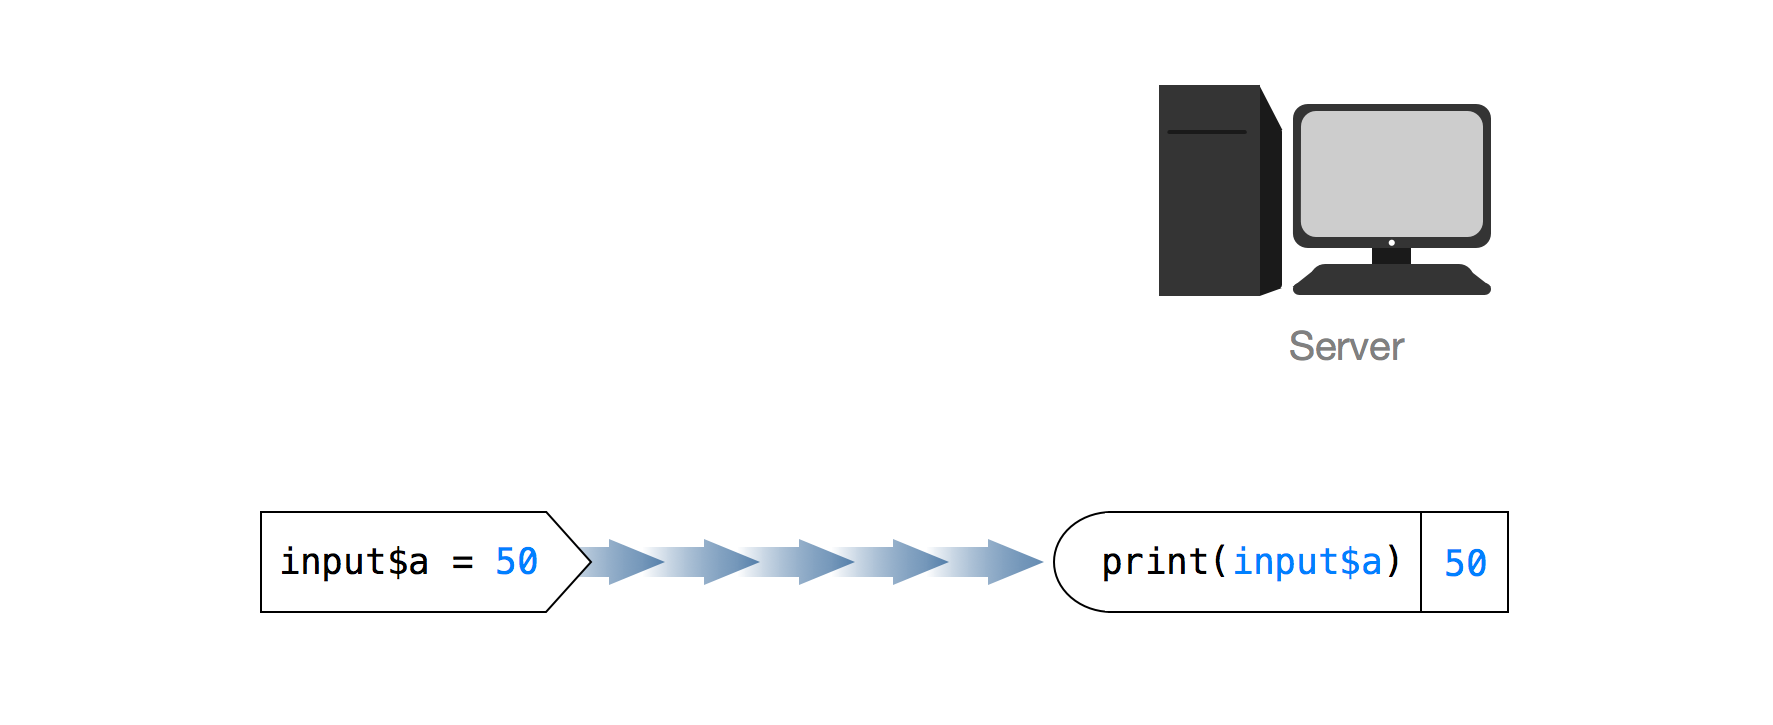 Input value input$a = 50. Output value print(input$a) 50 next to image of a server. Arrow goes from input to output.